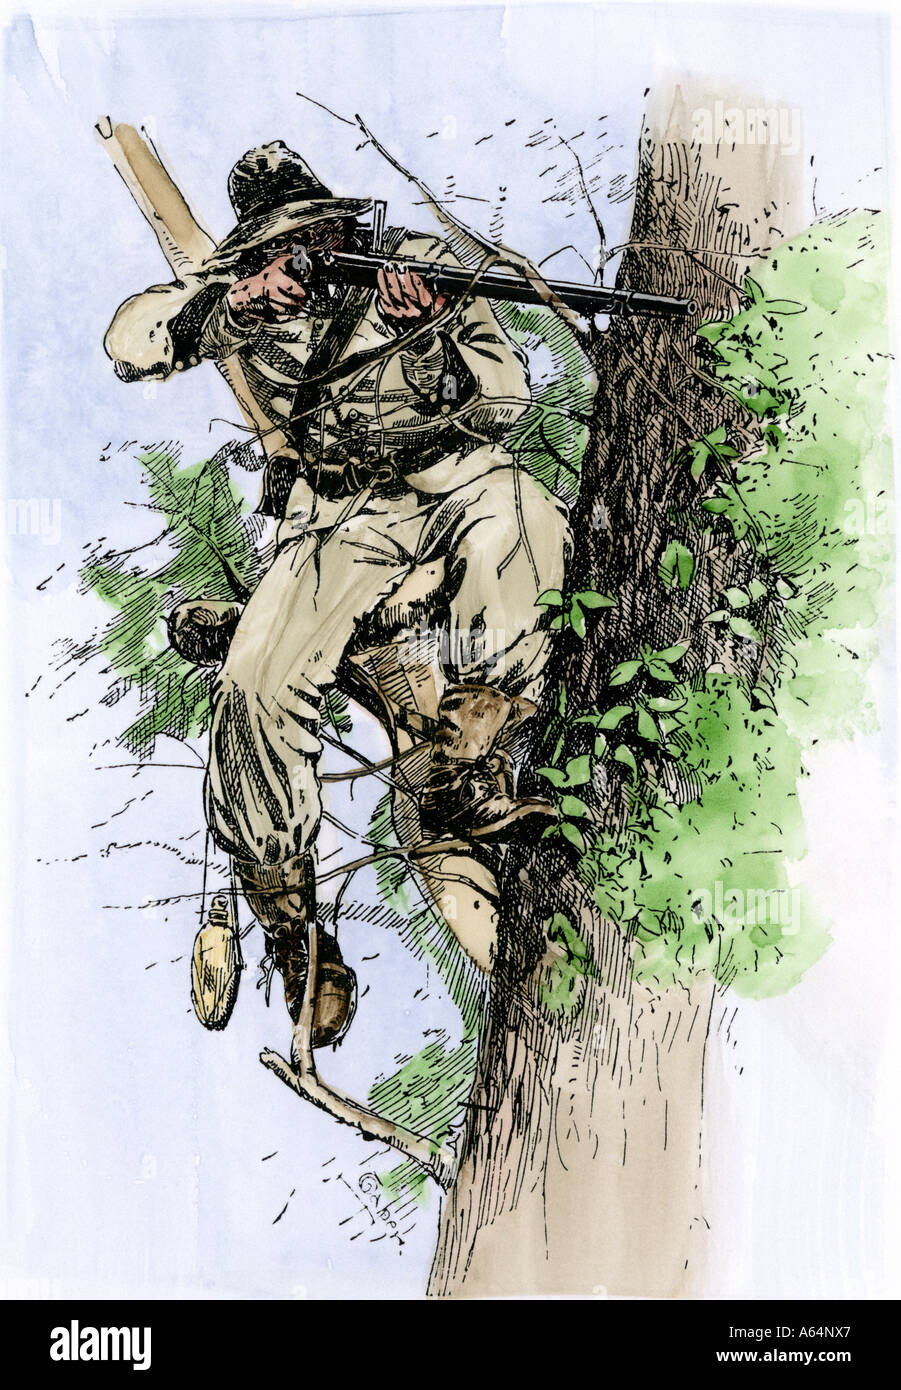 Confederate sharpshooter taking aim from his perch in a tree during the American Civil War. Hand-colored woodcut Stock Photo